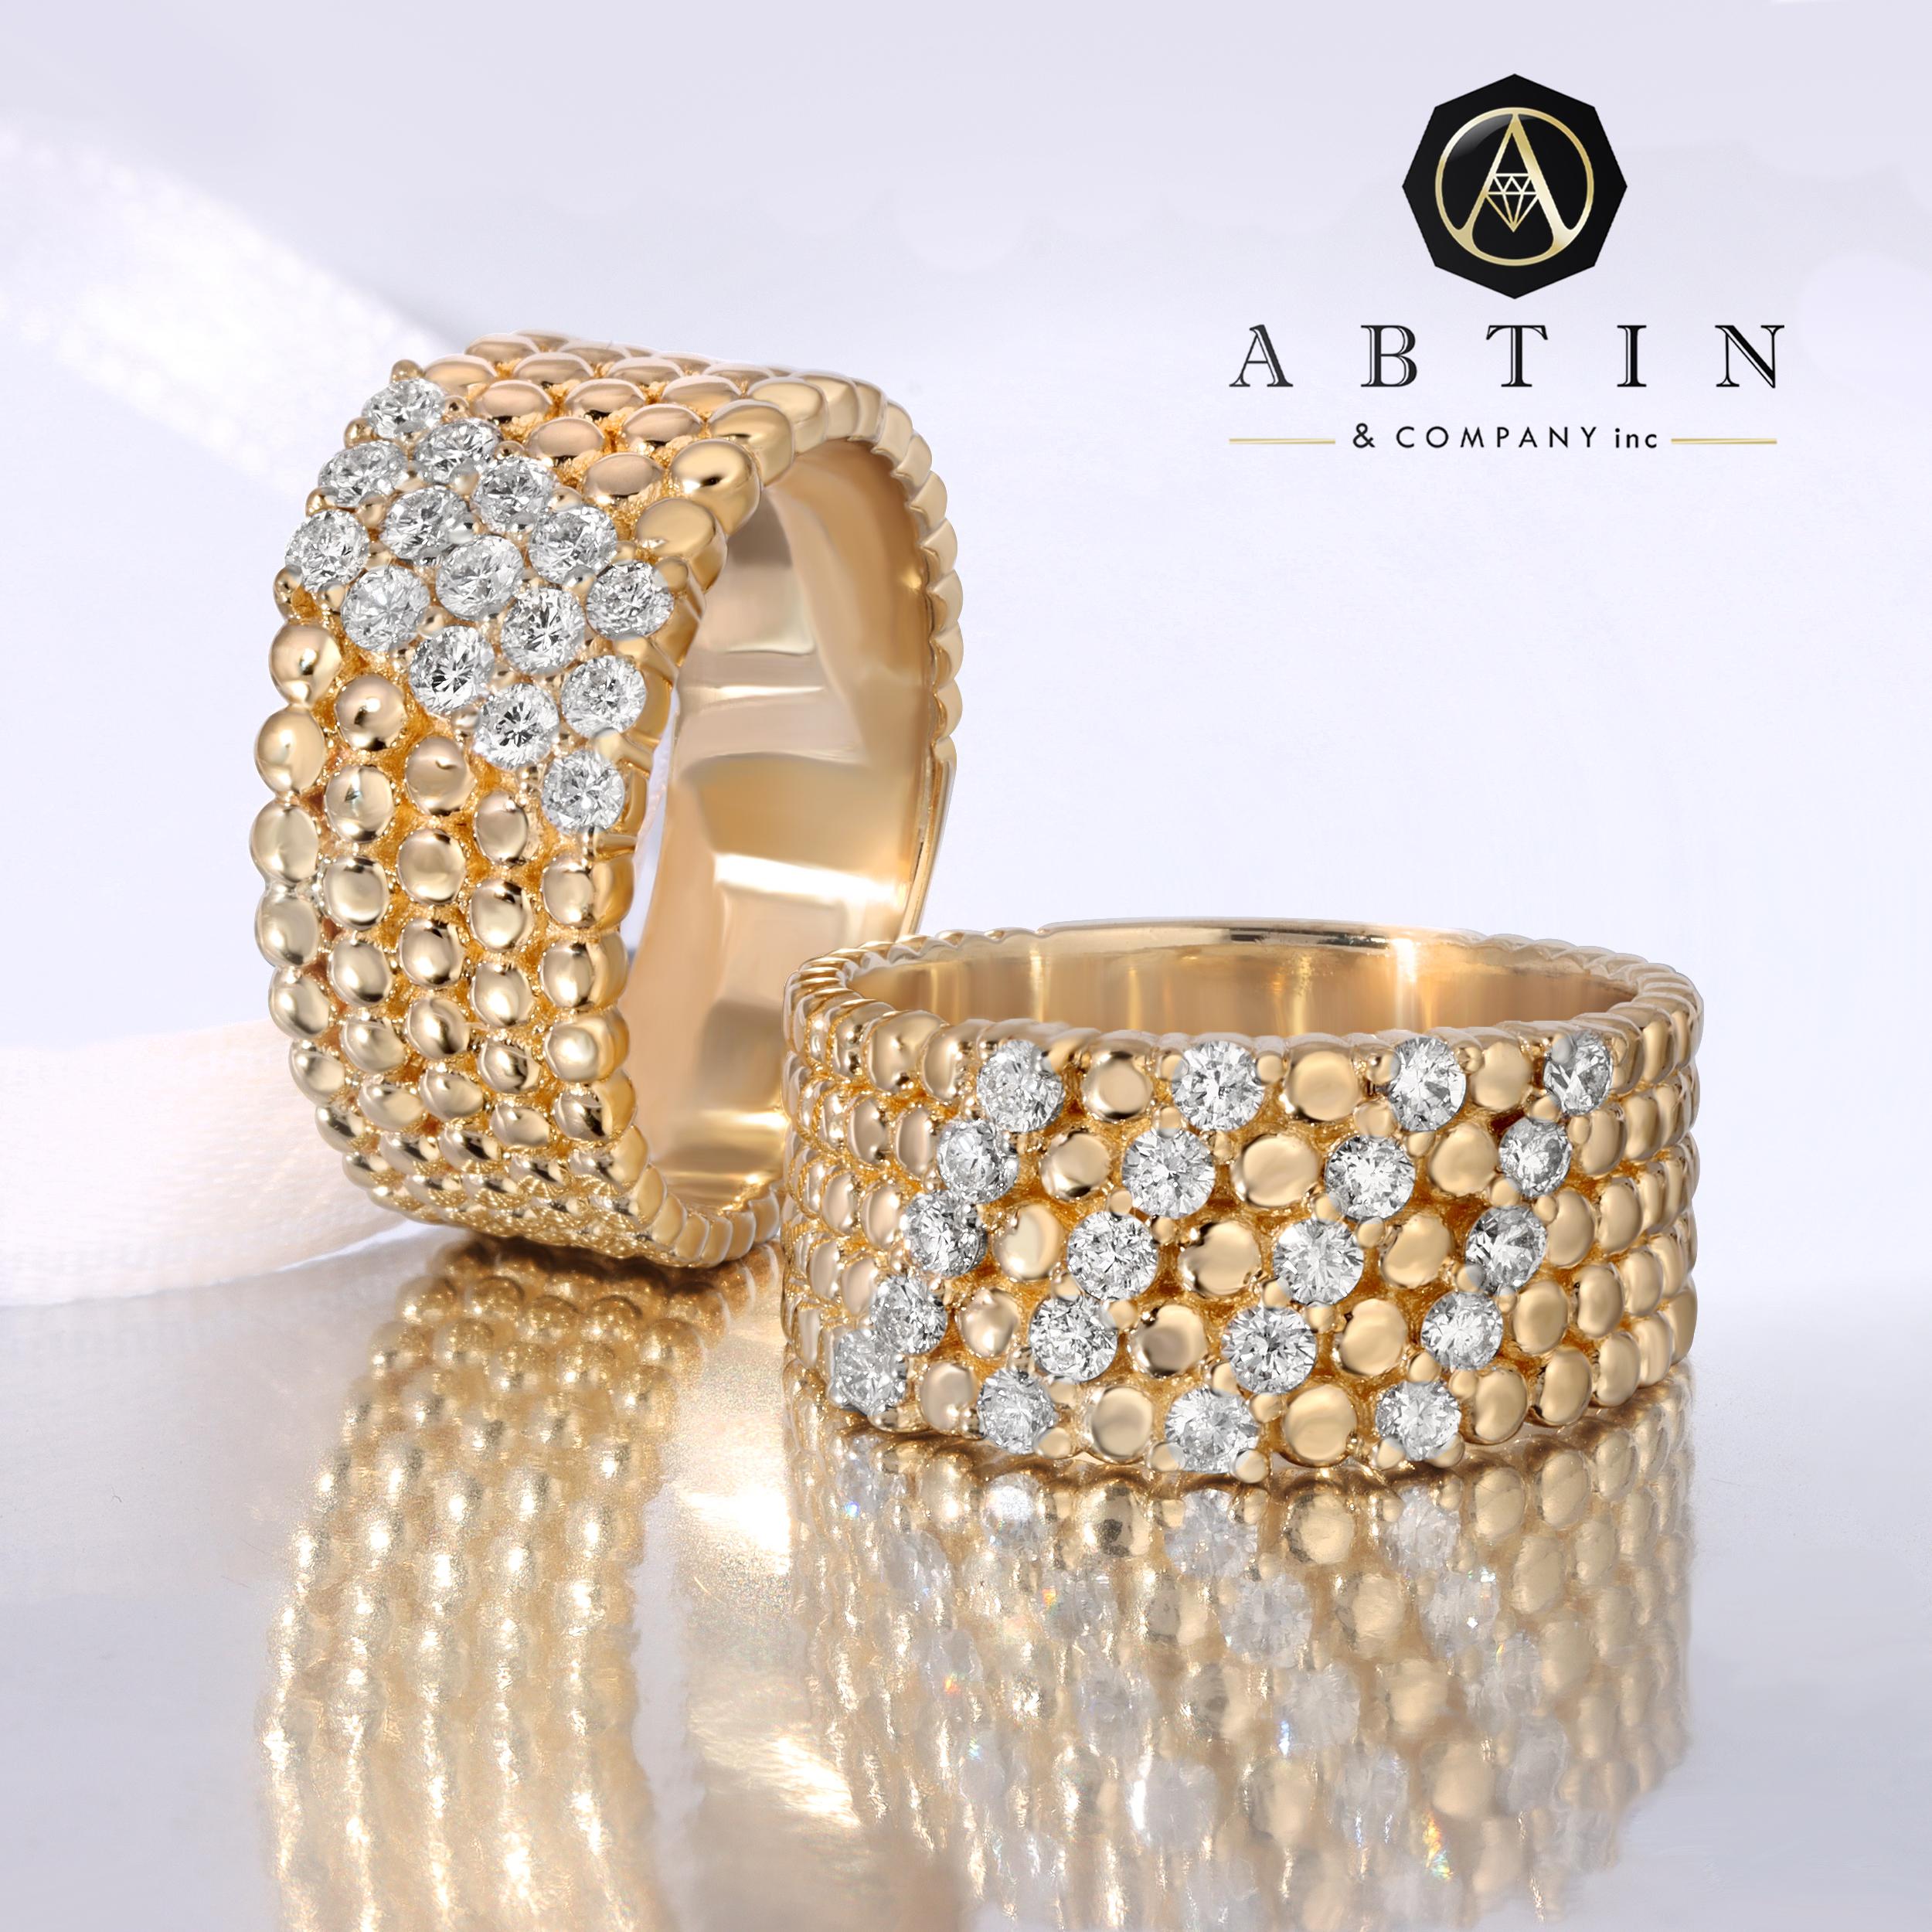 Made from 14k gold, this contemporary yellow gold ring with beaded detailing and diamonds is an ideal choice for daily wear. The four rows of round prong-set diamonds embedded in the beaded bands add a touch of sophistication to this everyday